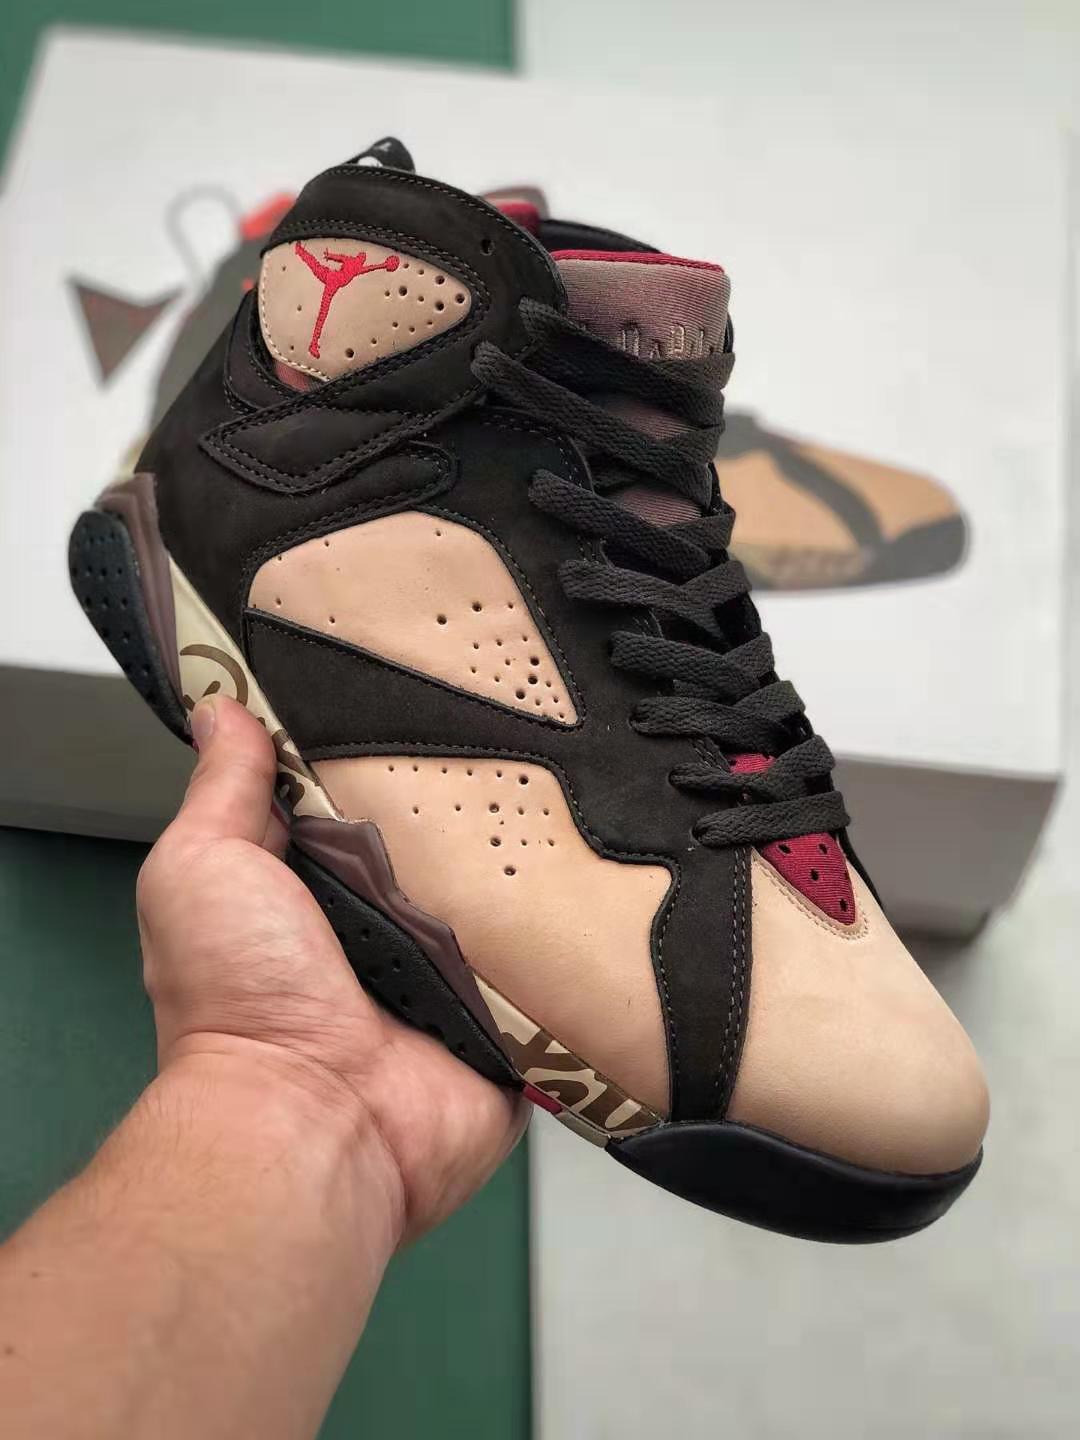 Patta x Air Jordan 7 Retro OG SP 'Shimmer' AT3375-200 - Exclusive Collaboration Release